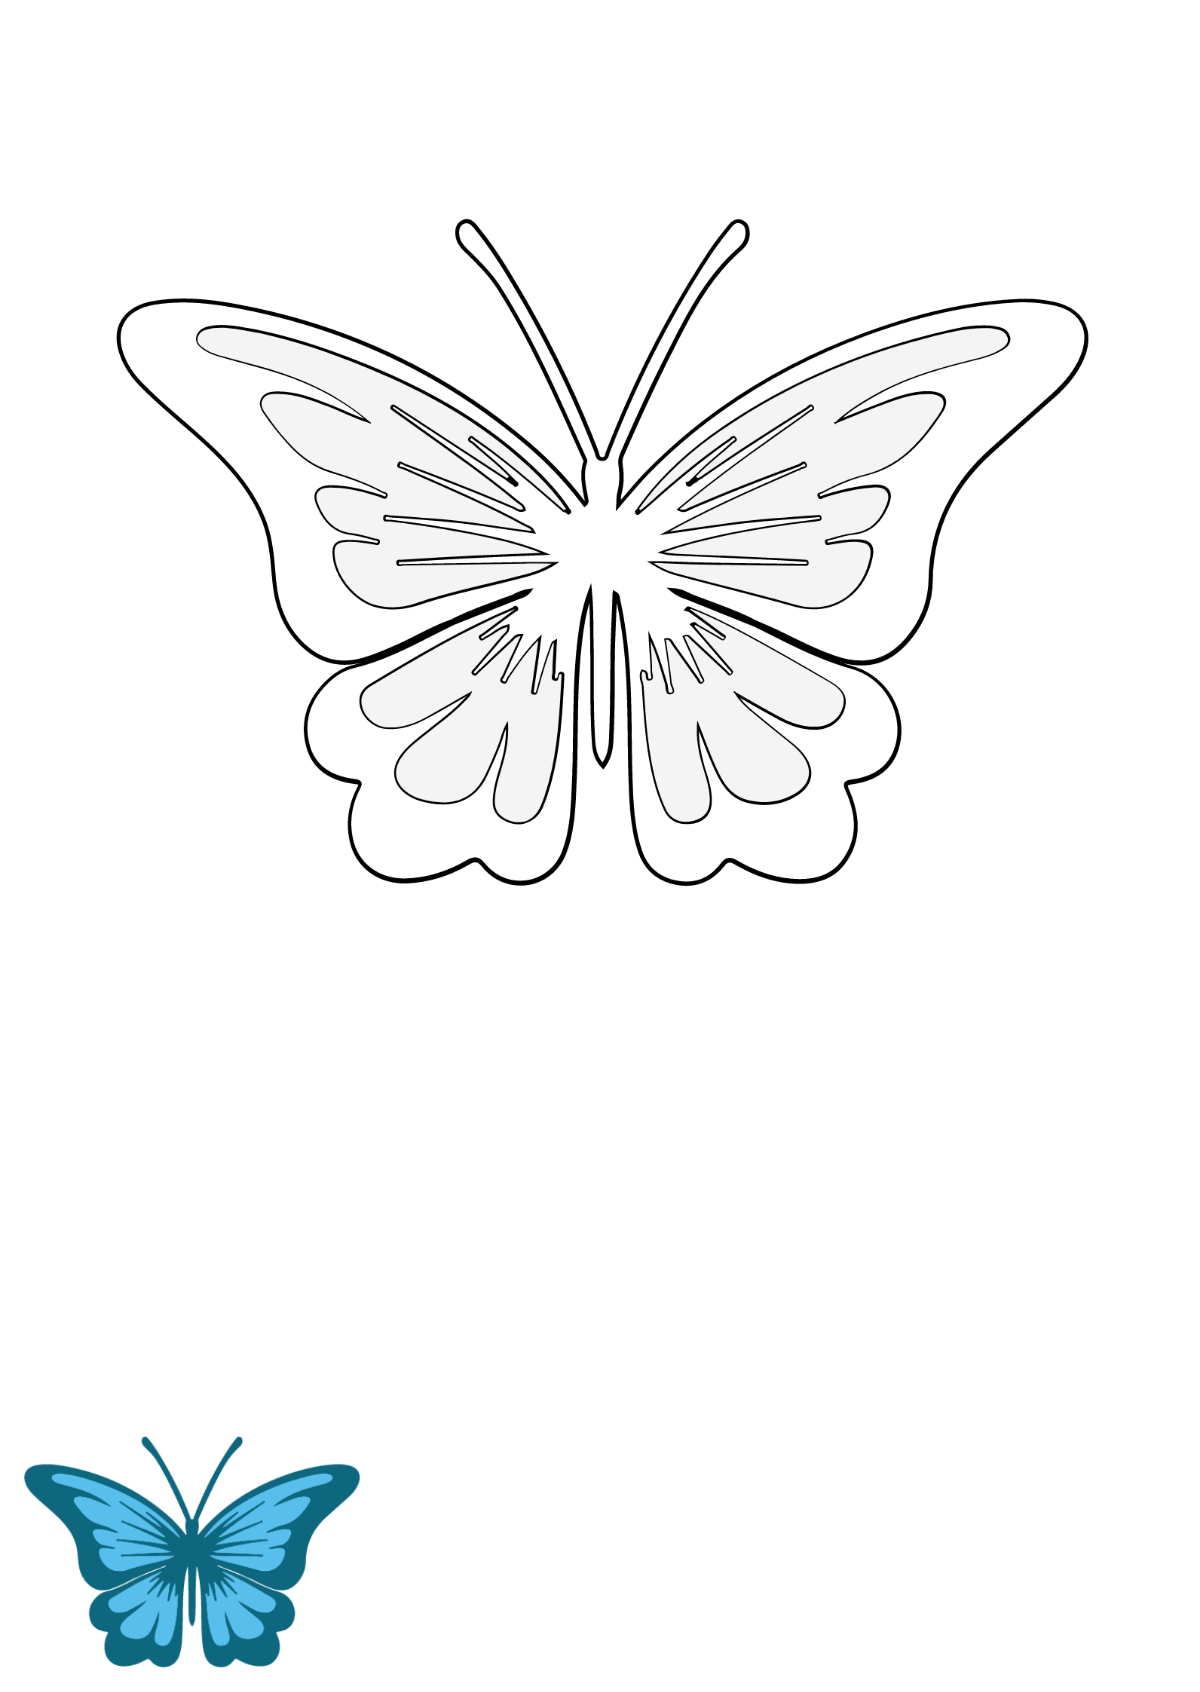 Fancy Butterfly Coloring Page Template